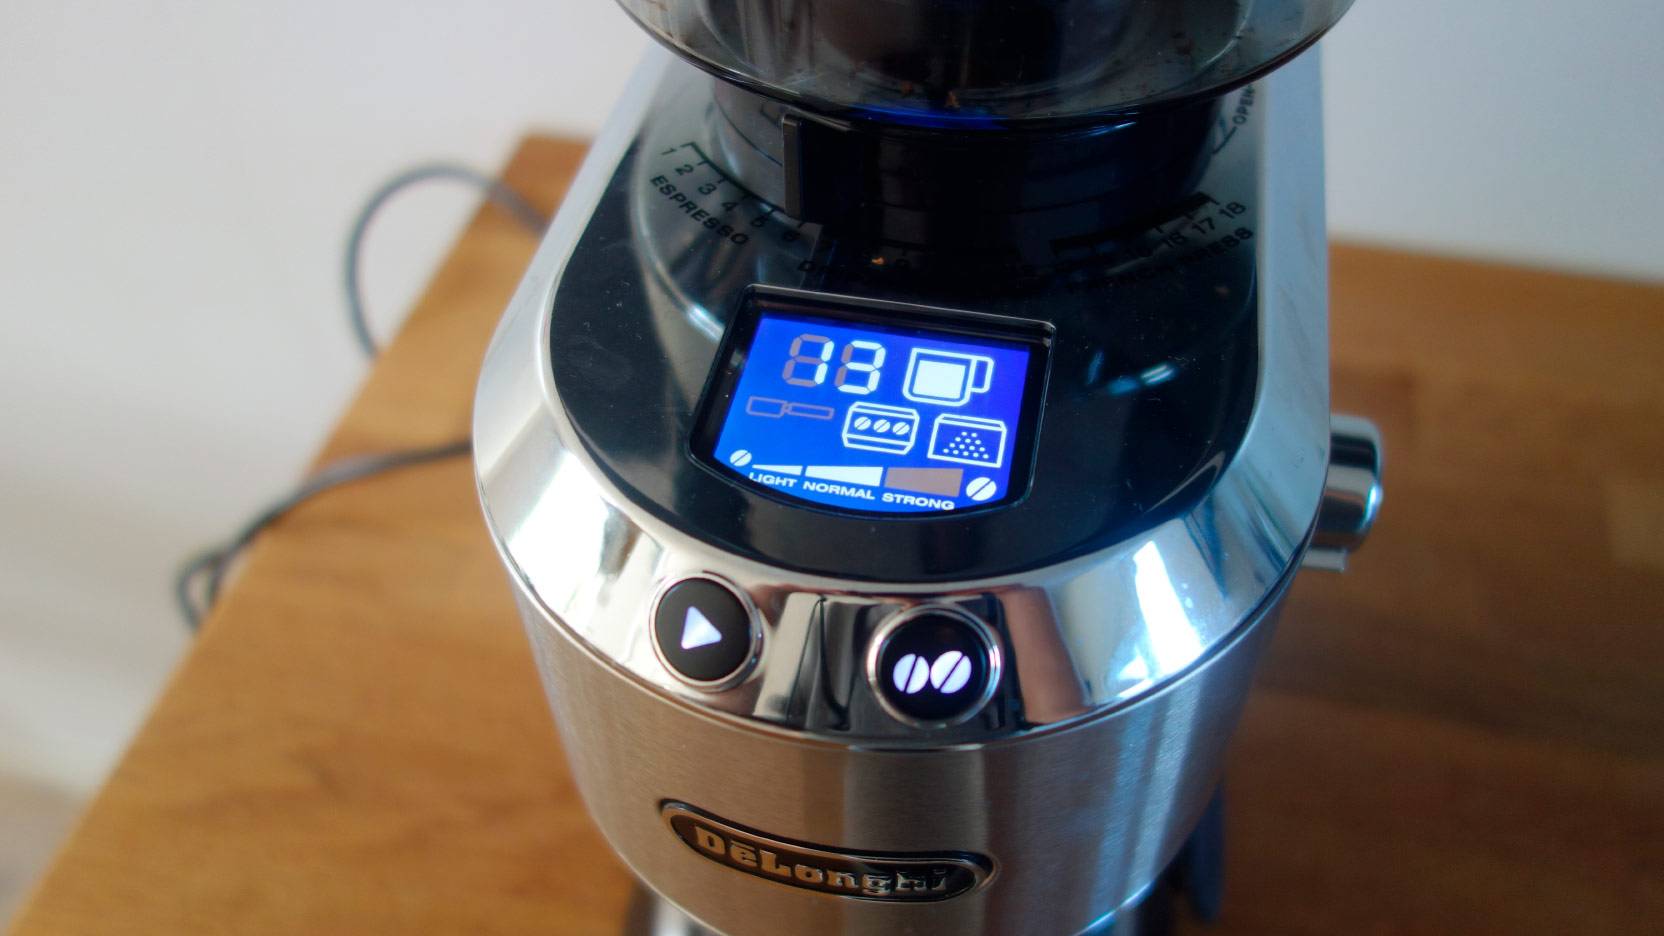 Image of the blue display with the many options on Delonghi KG521 coffee grinder